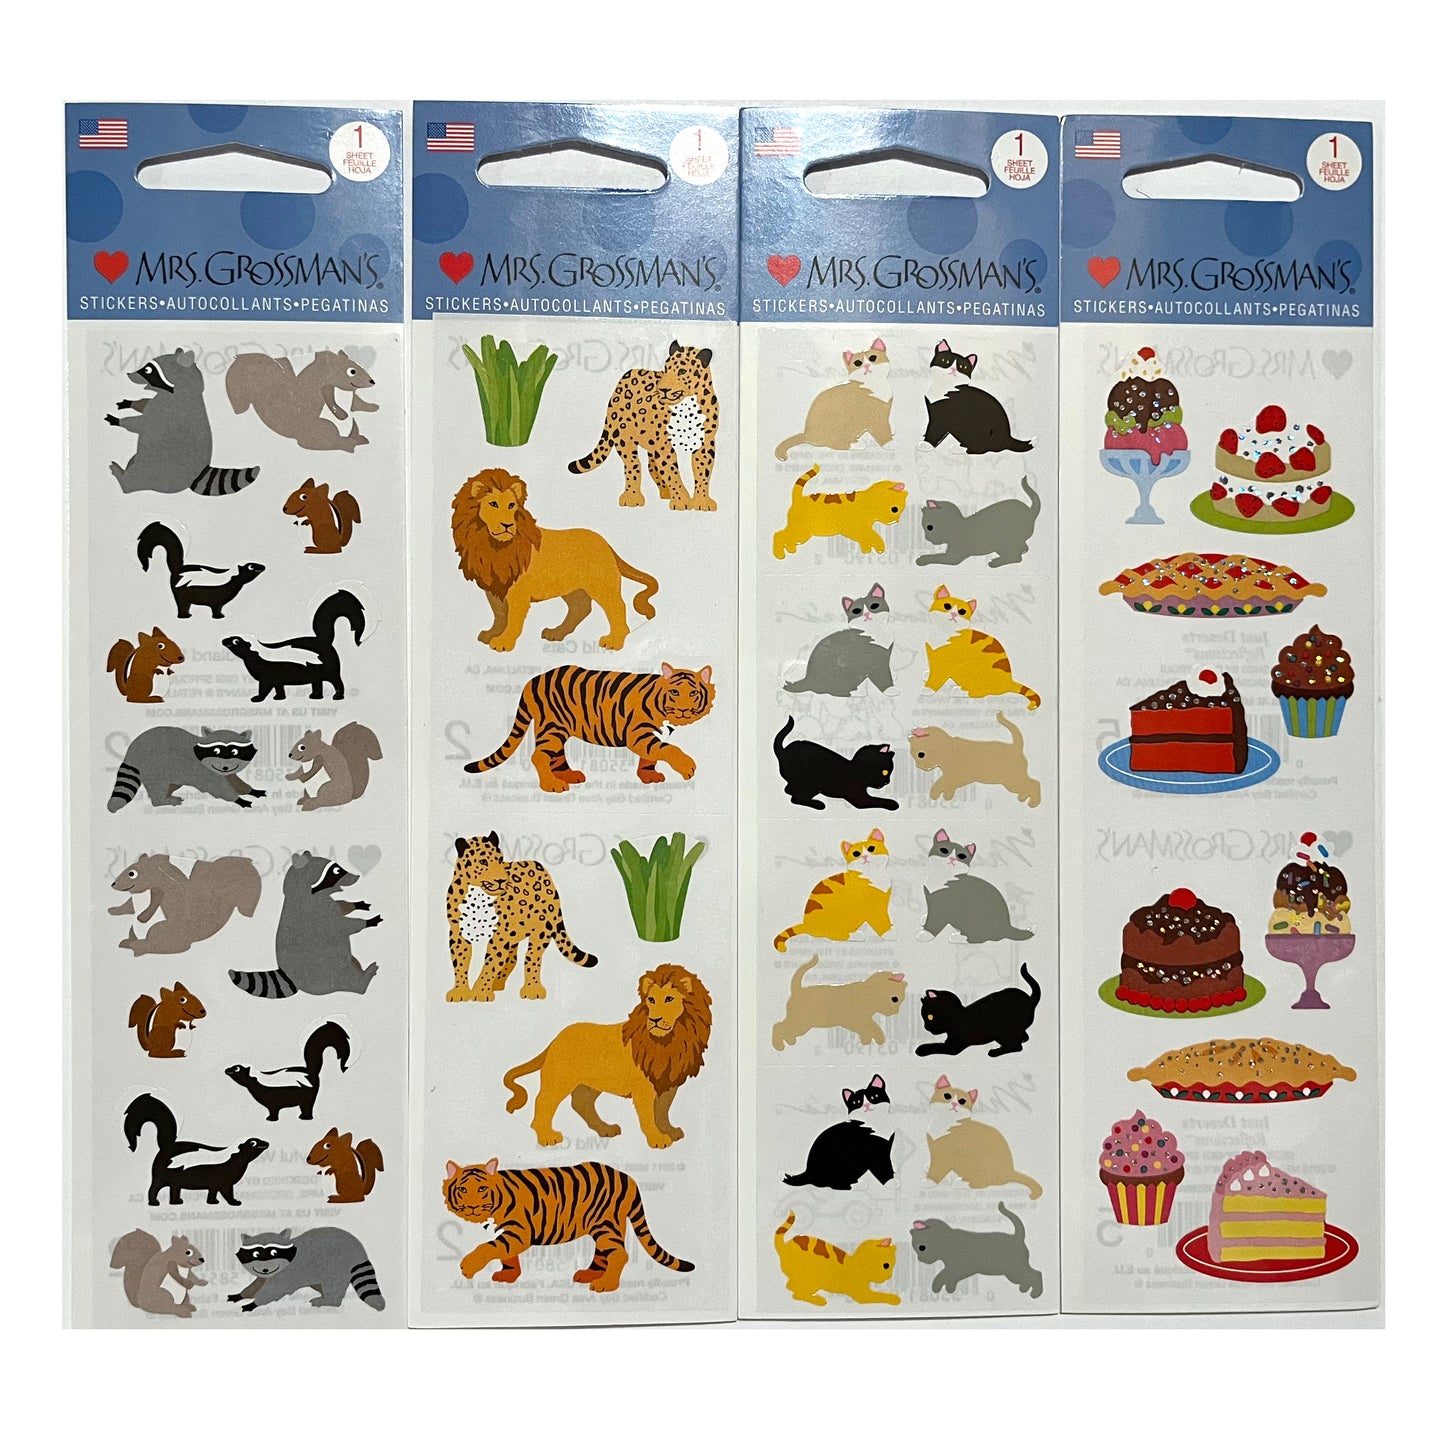 Mrs. Grossman's Animal Party Sticker Strips - New in Package